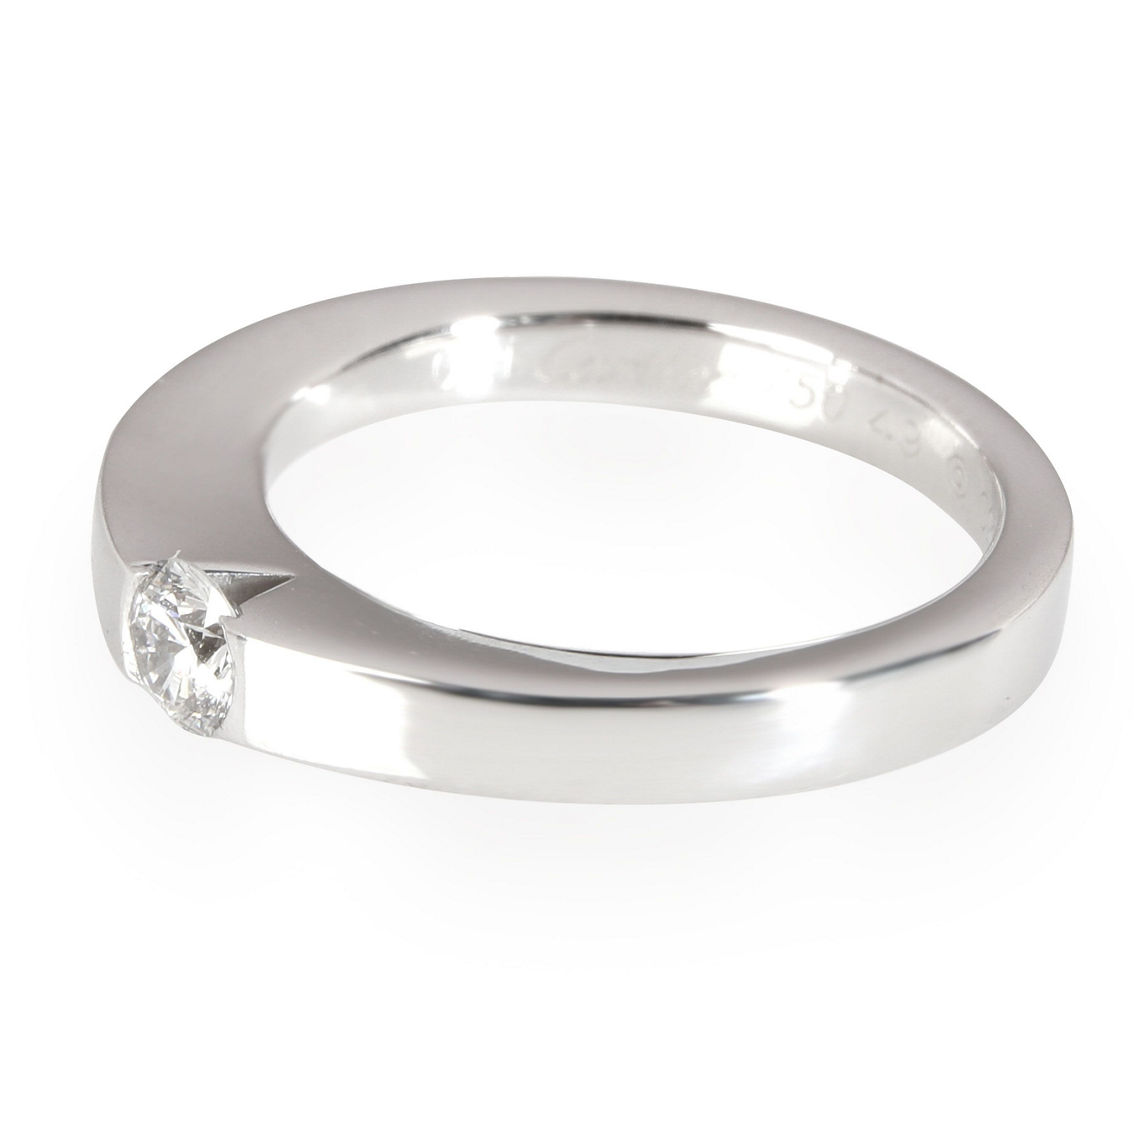 Cartier Date Solitaire Ring Pre-Owned - Image 2 of 2